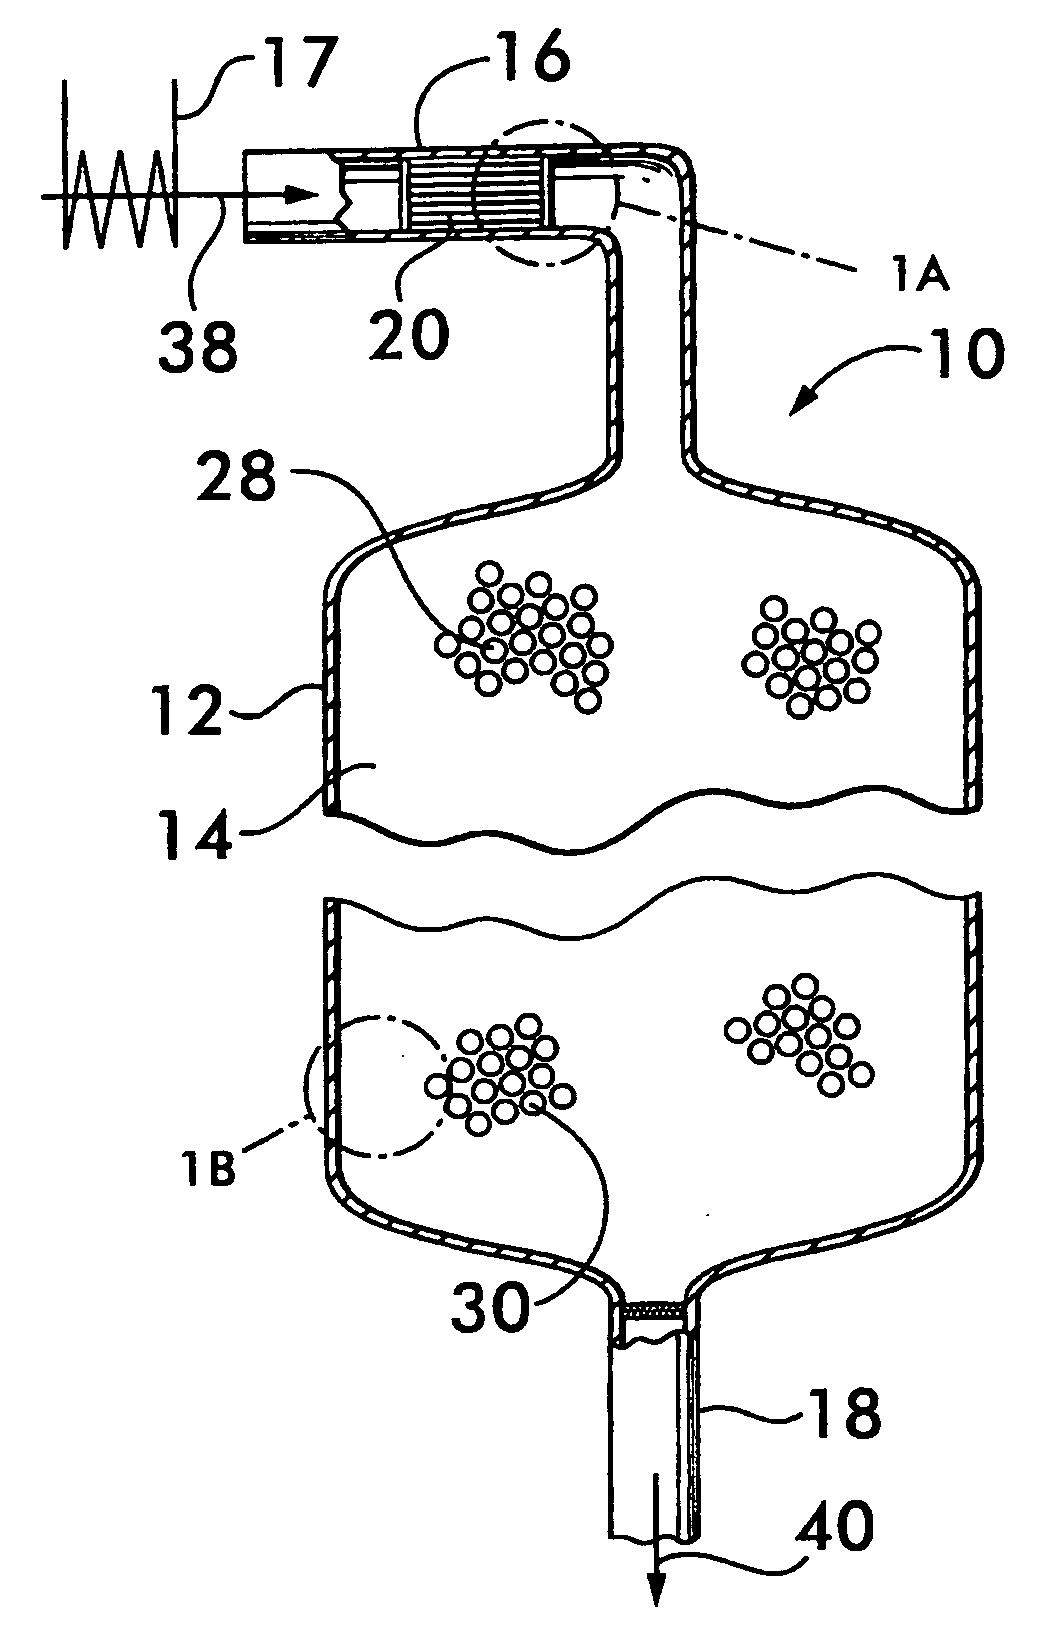 Process and apparatus for production of hydrogen using the water gas shift reaction